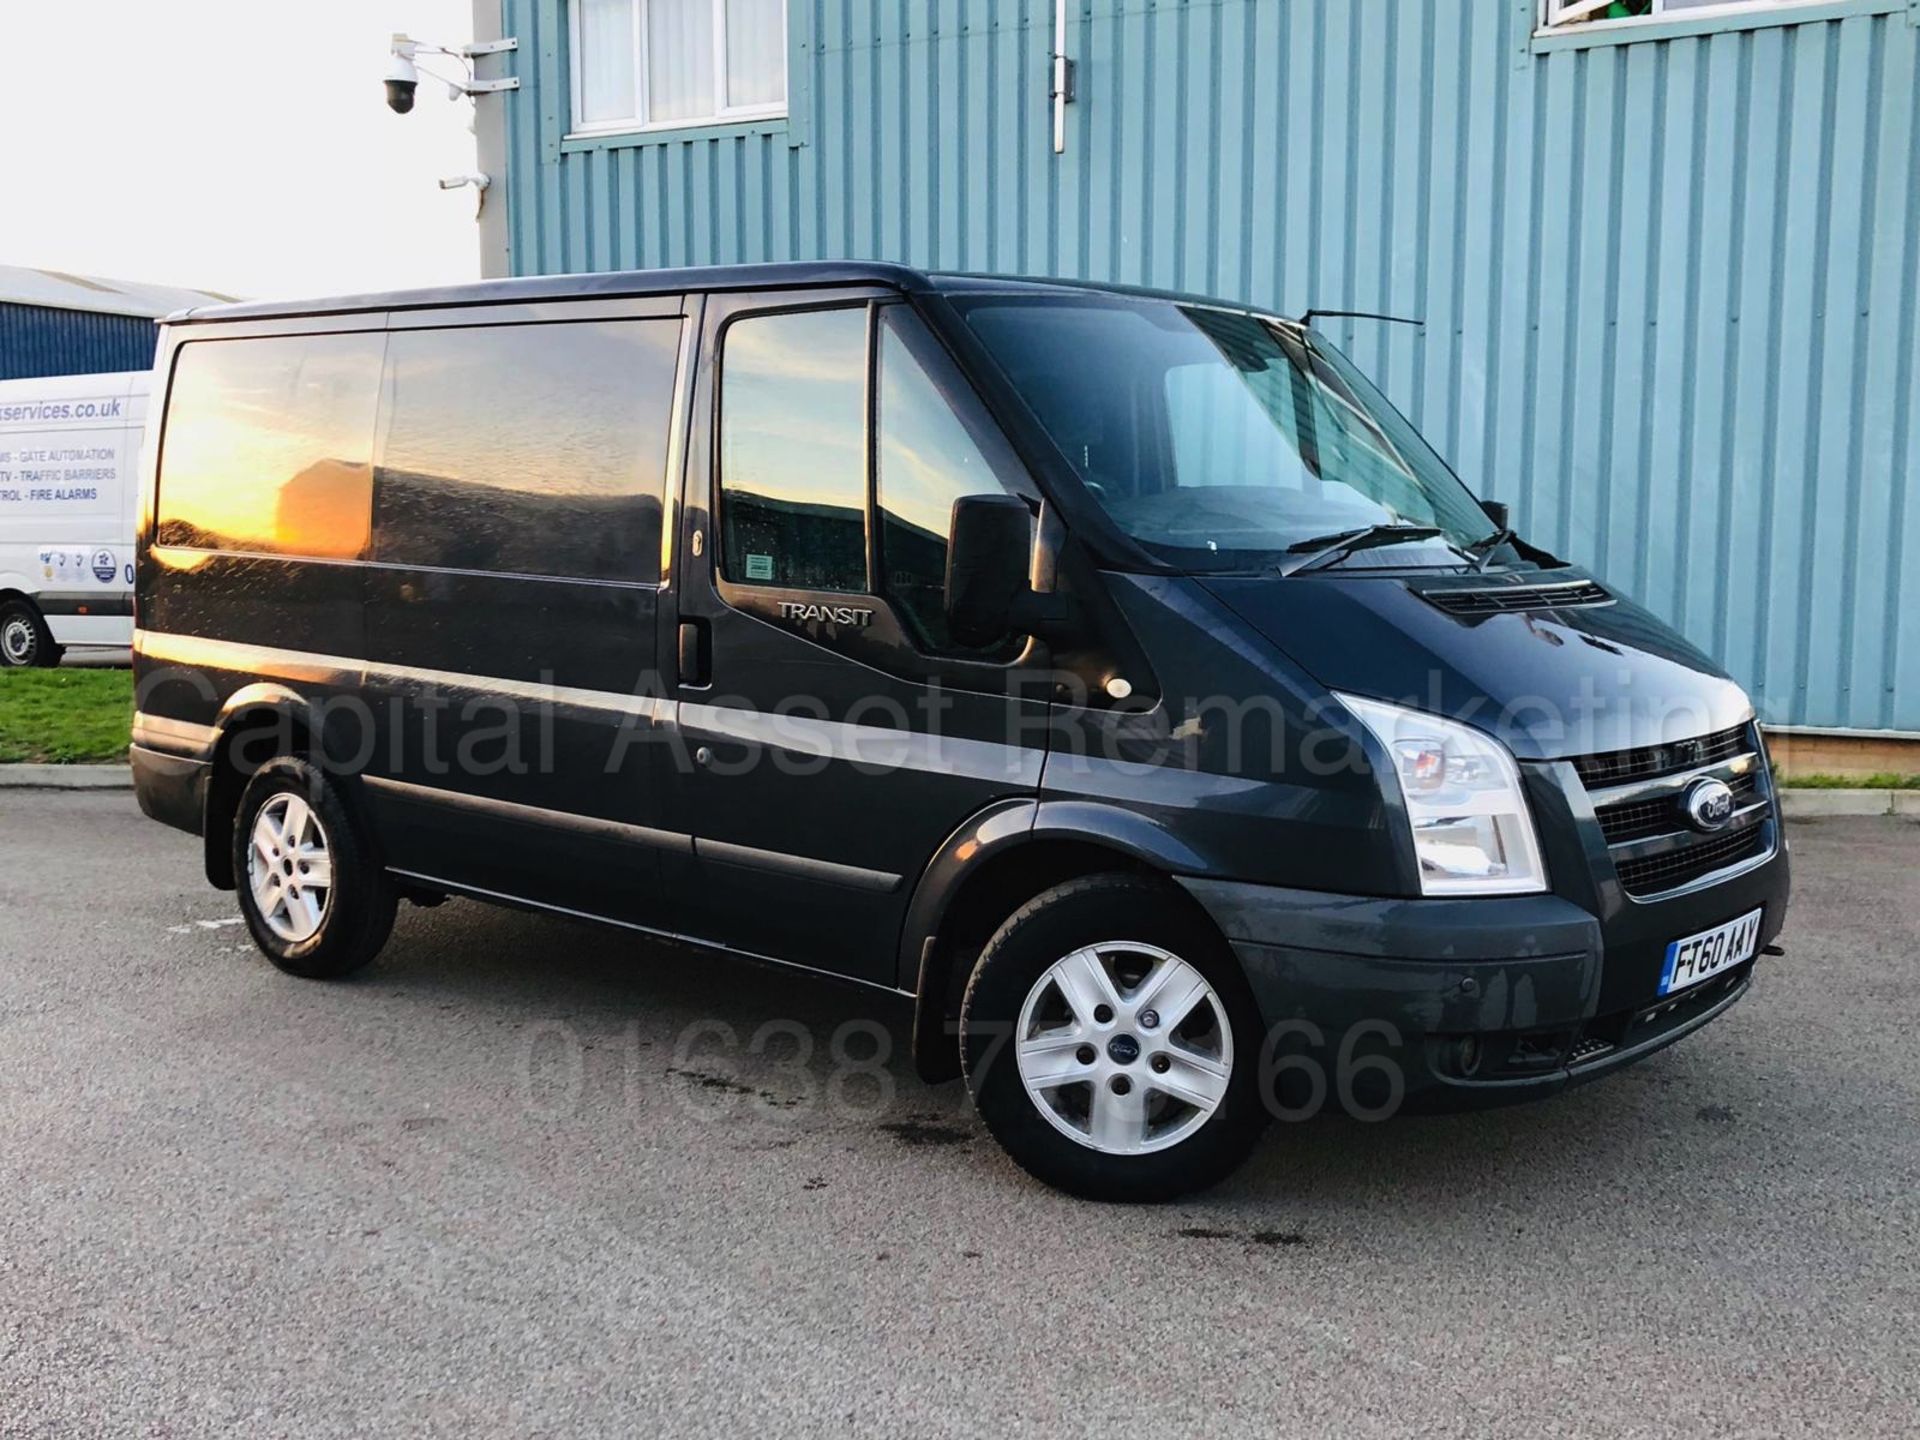 FORD TRANSIT 115 T260S *LIMITED EDITION* (2011 MODEL) '2.2 TDCI - 115 BHP - 6 SPEED' **AIR CON**